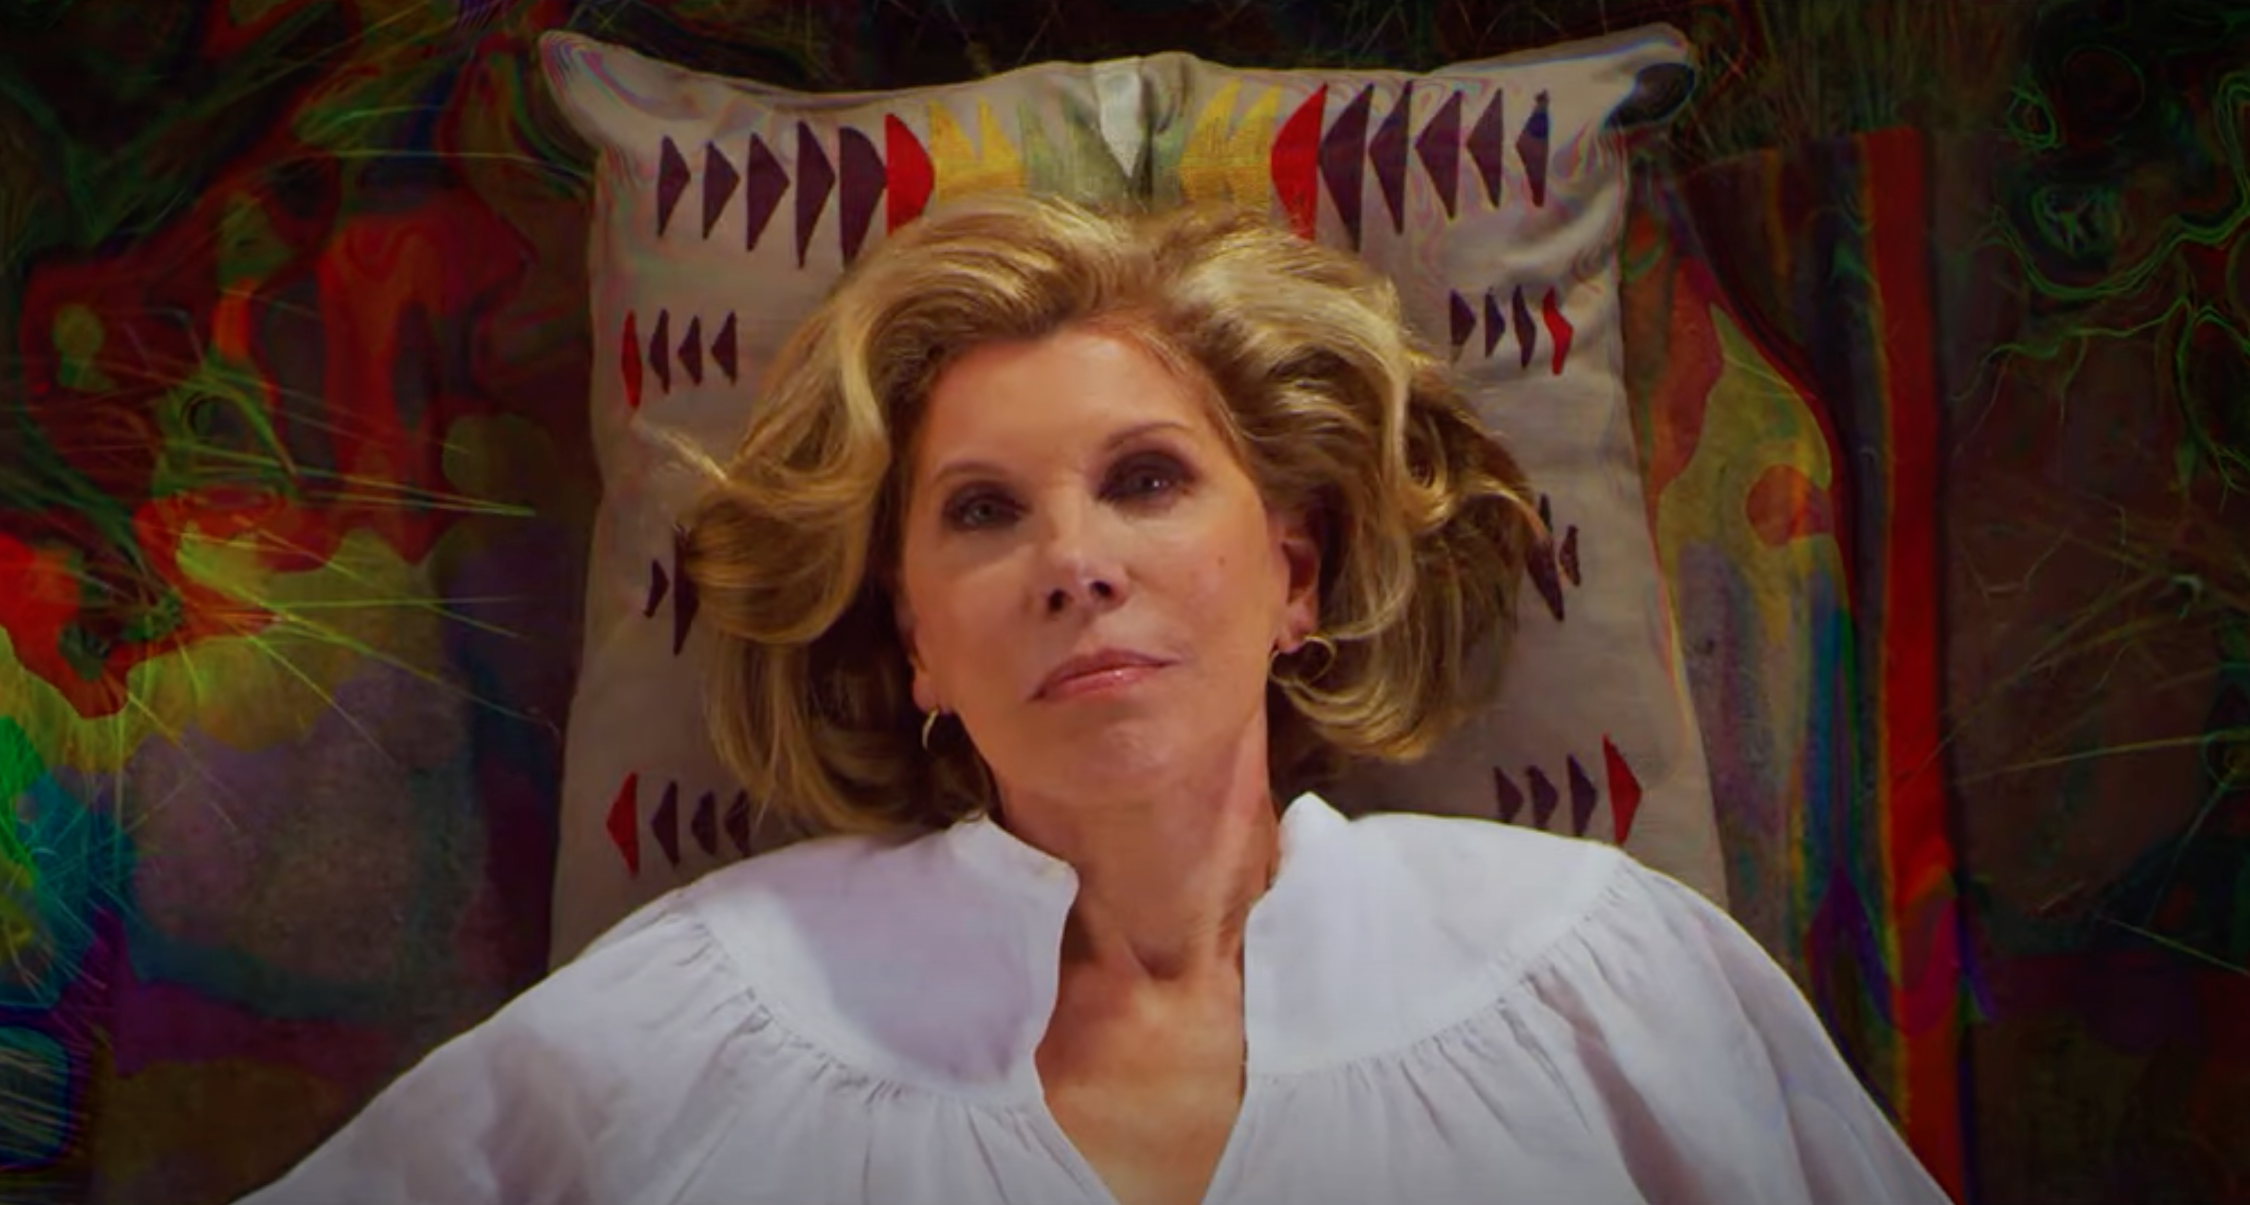 Trailer Watch: Diane Is Right Back Where She Started within the Sixth & Final Season of “The Good Fight”